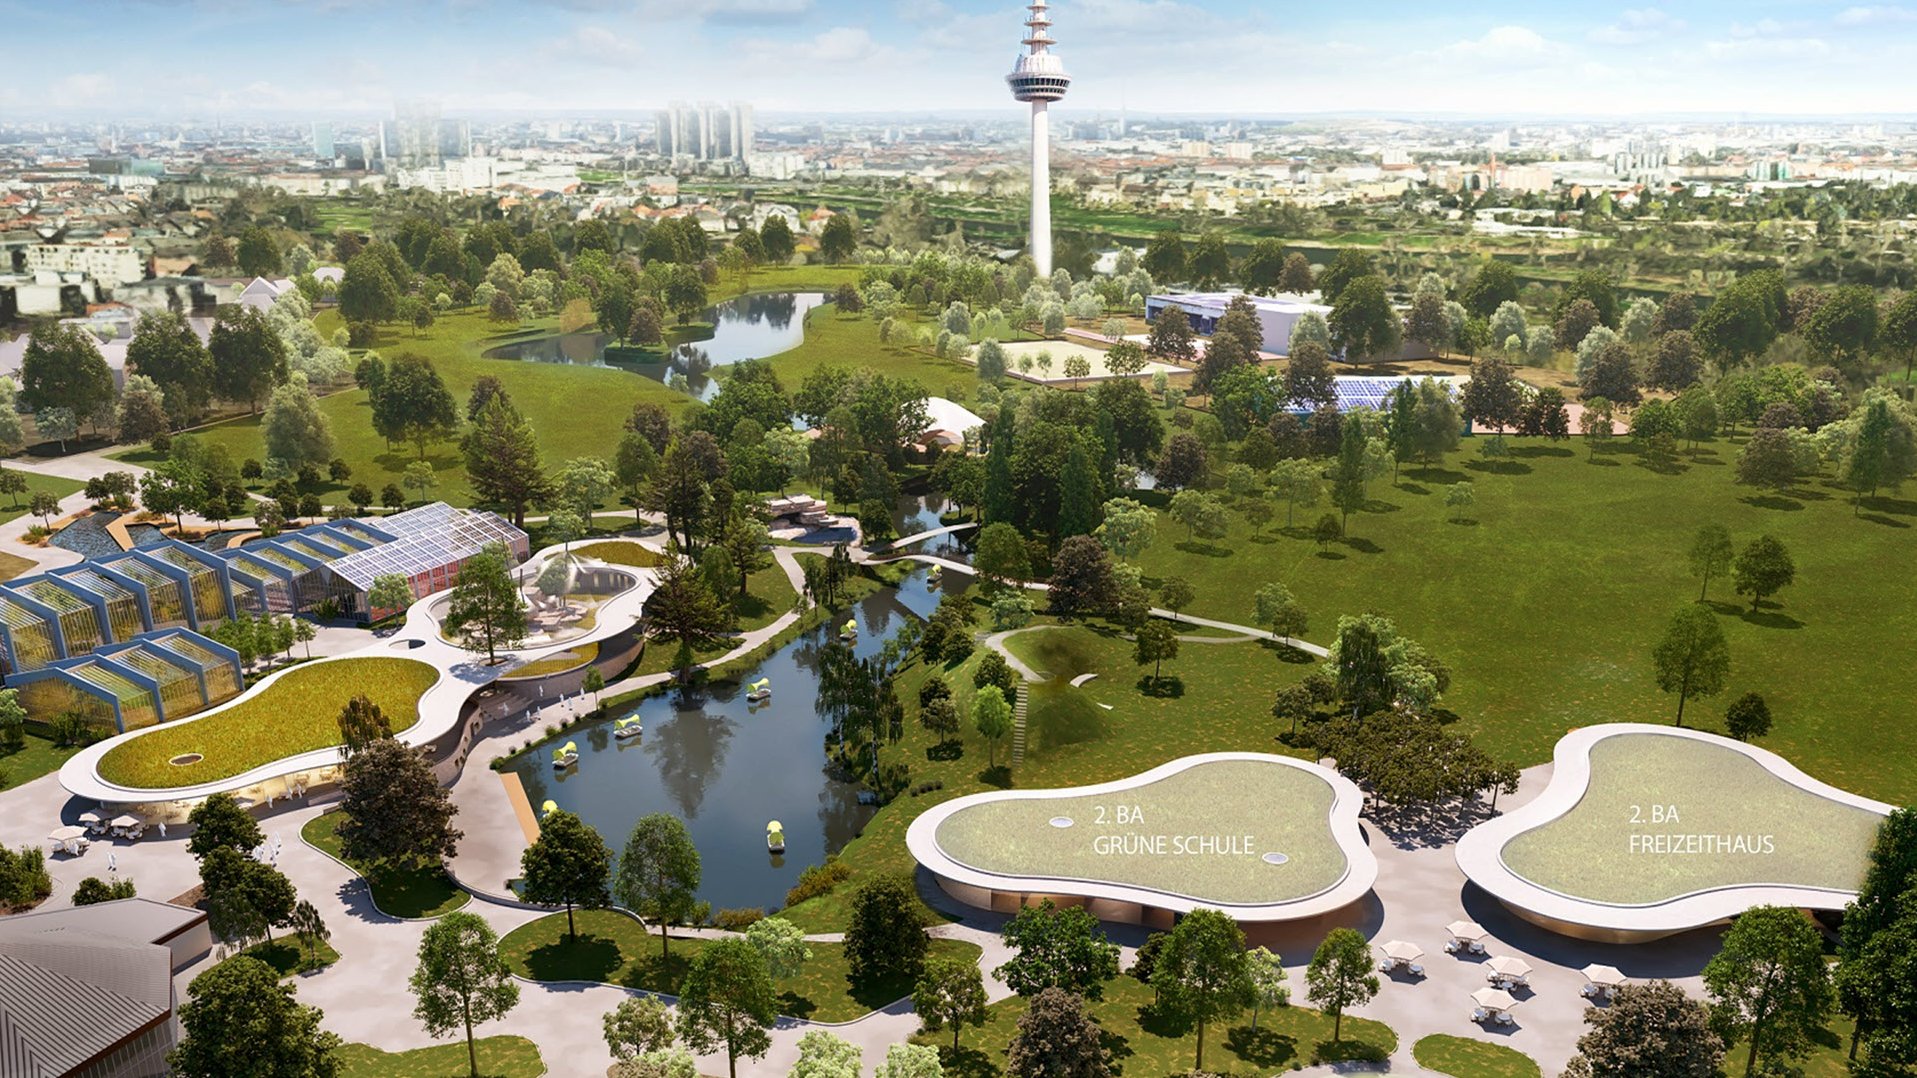 uisenpark - New park centre in Mannheim, Germany 